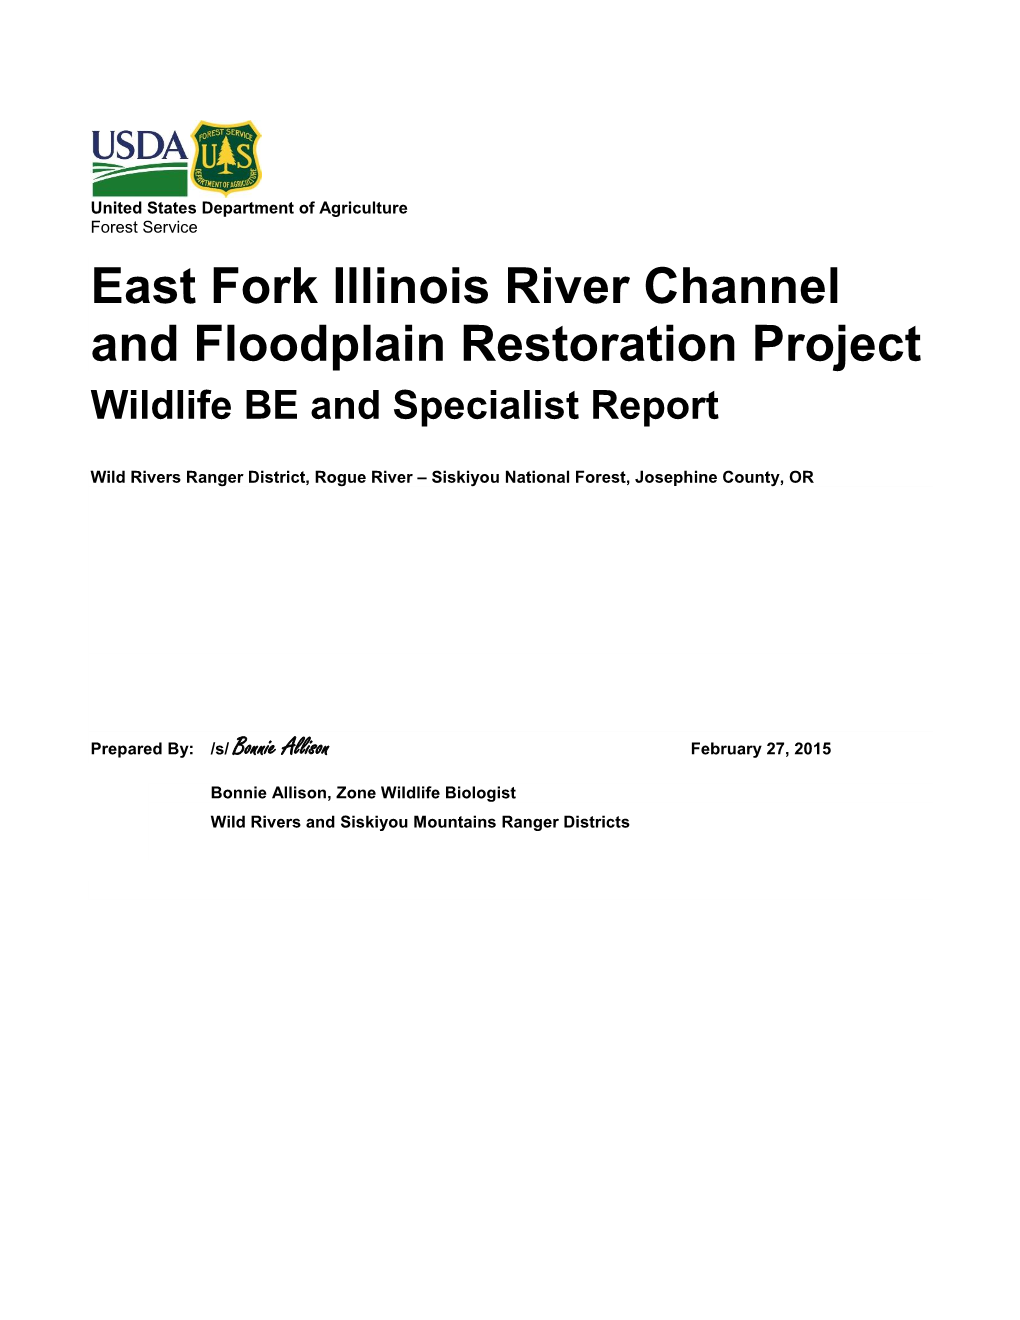 East Fork Illinois River Channel and Floodplain Restoration Project Wildlife BE and Specialist Report